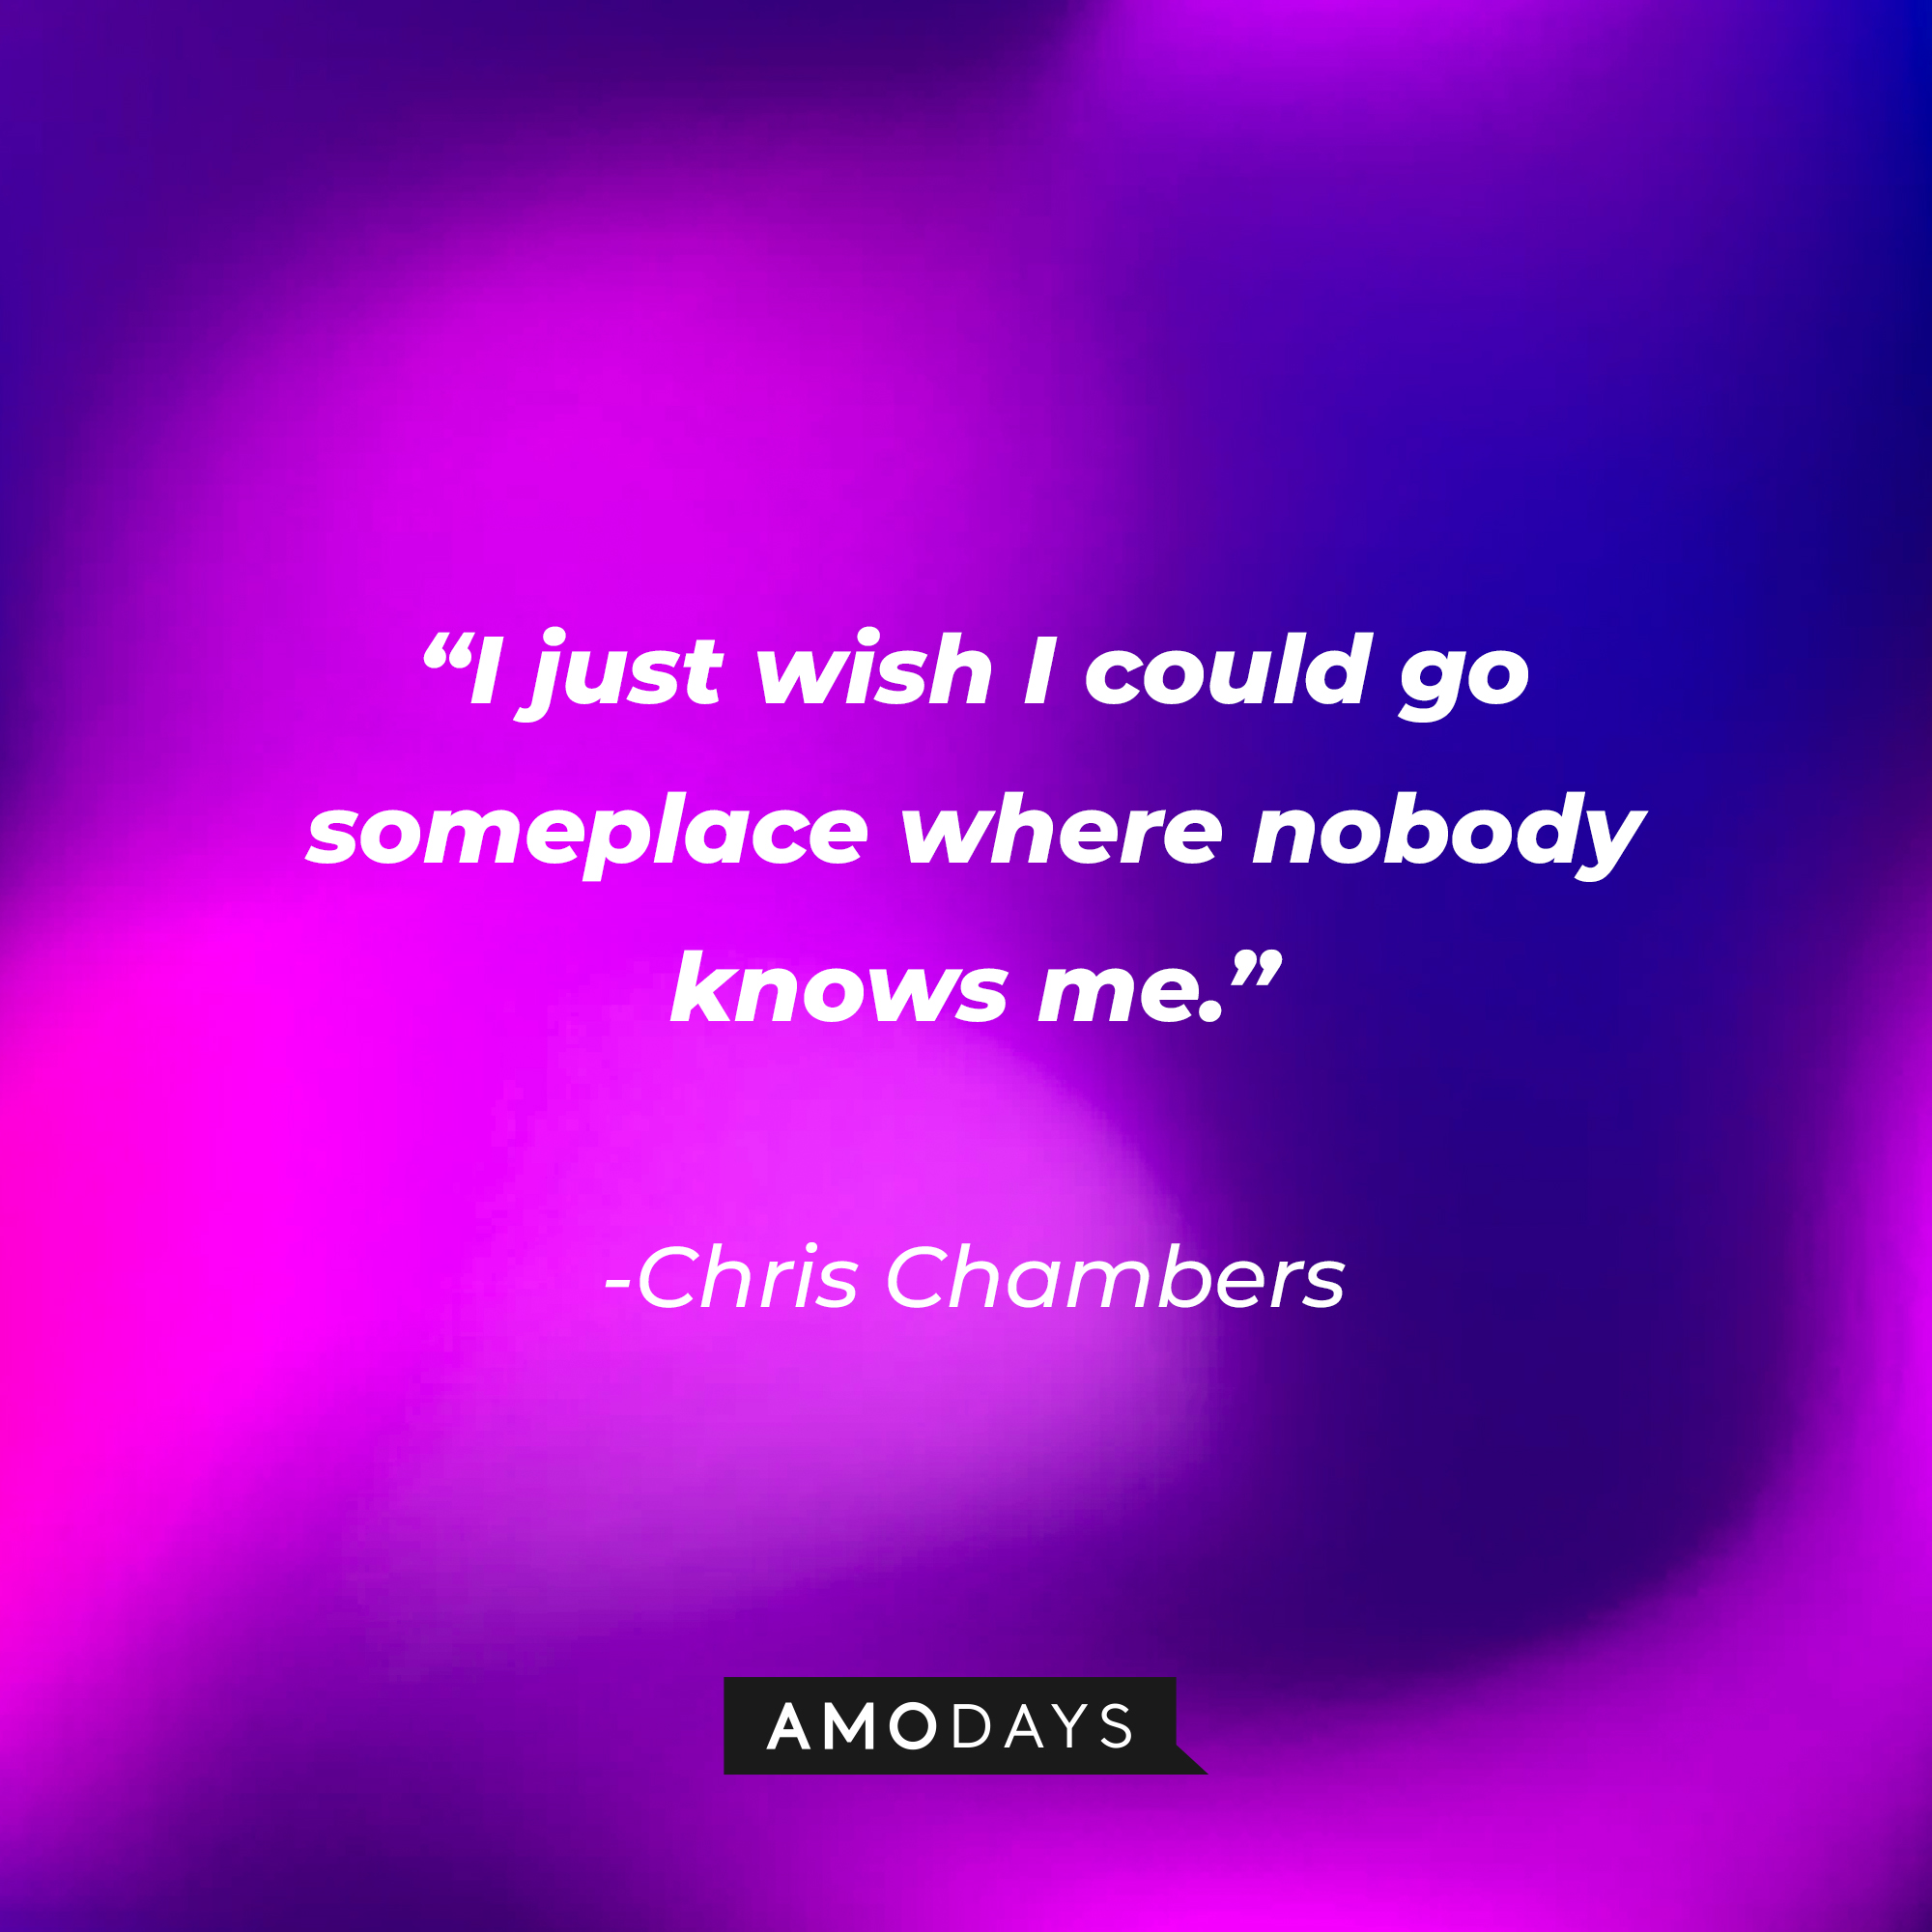 Chris Chambers’s quote:“I just wish I could go someplace where nobody knows me.." | Source: AmoDays